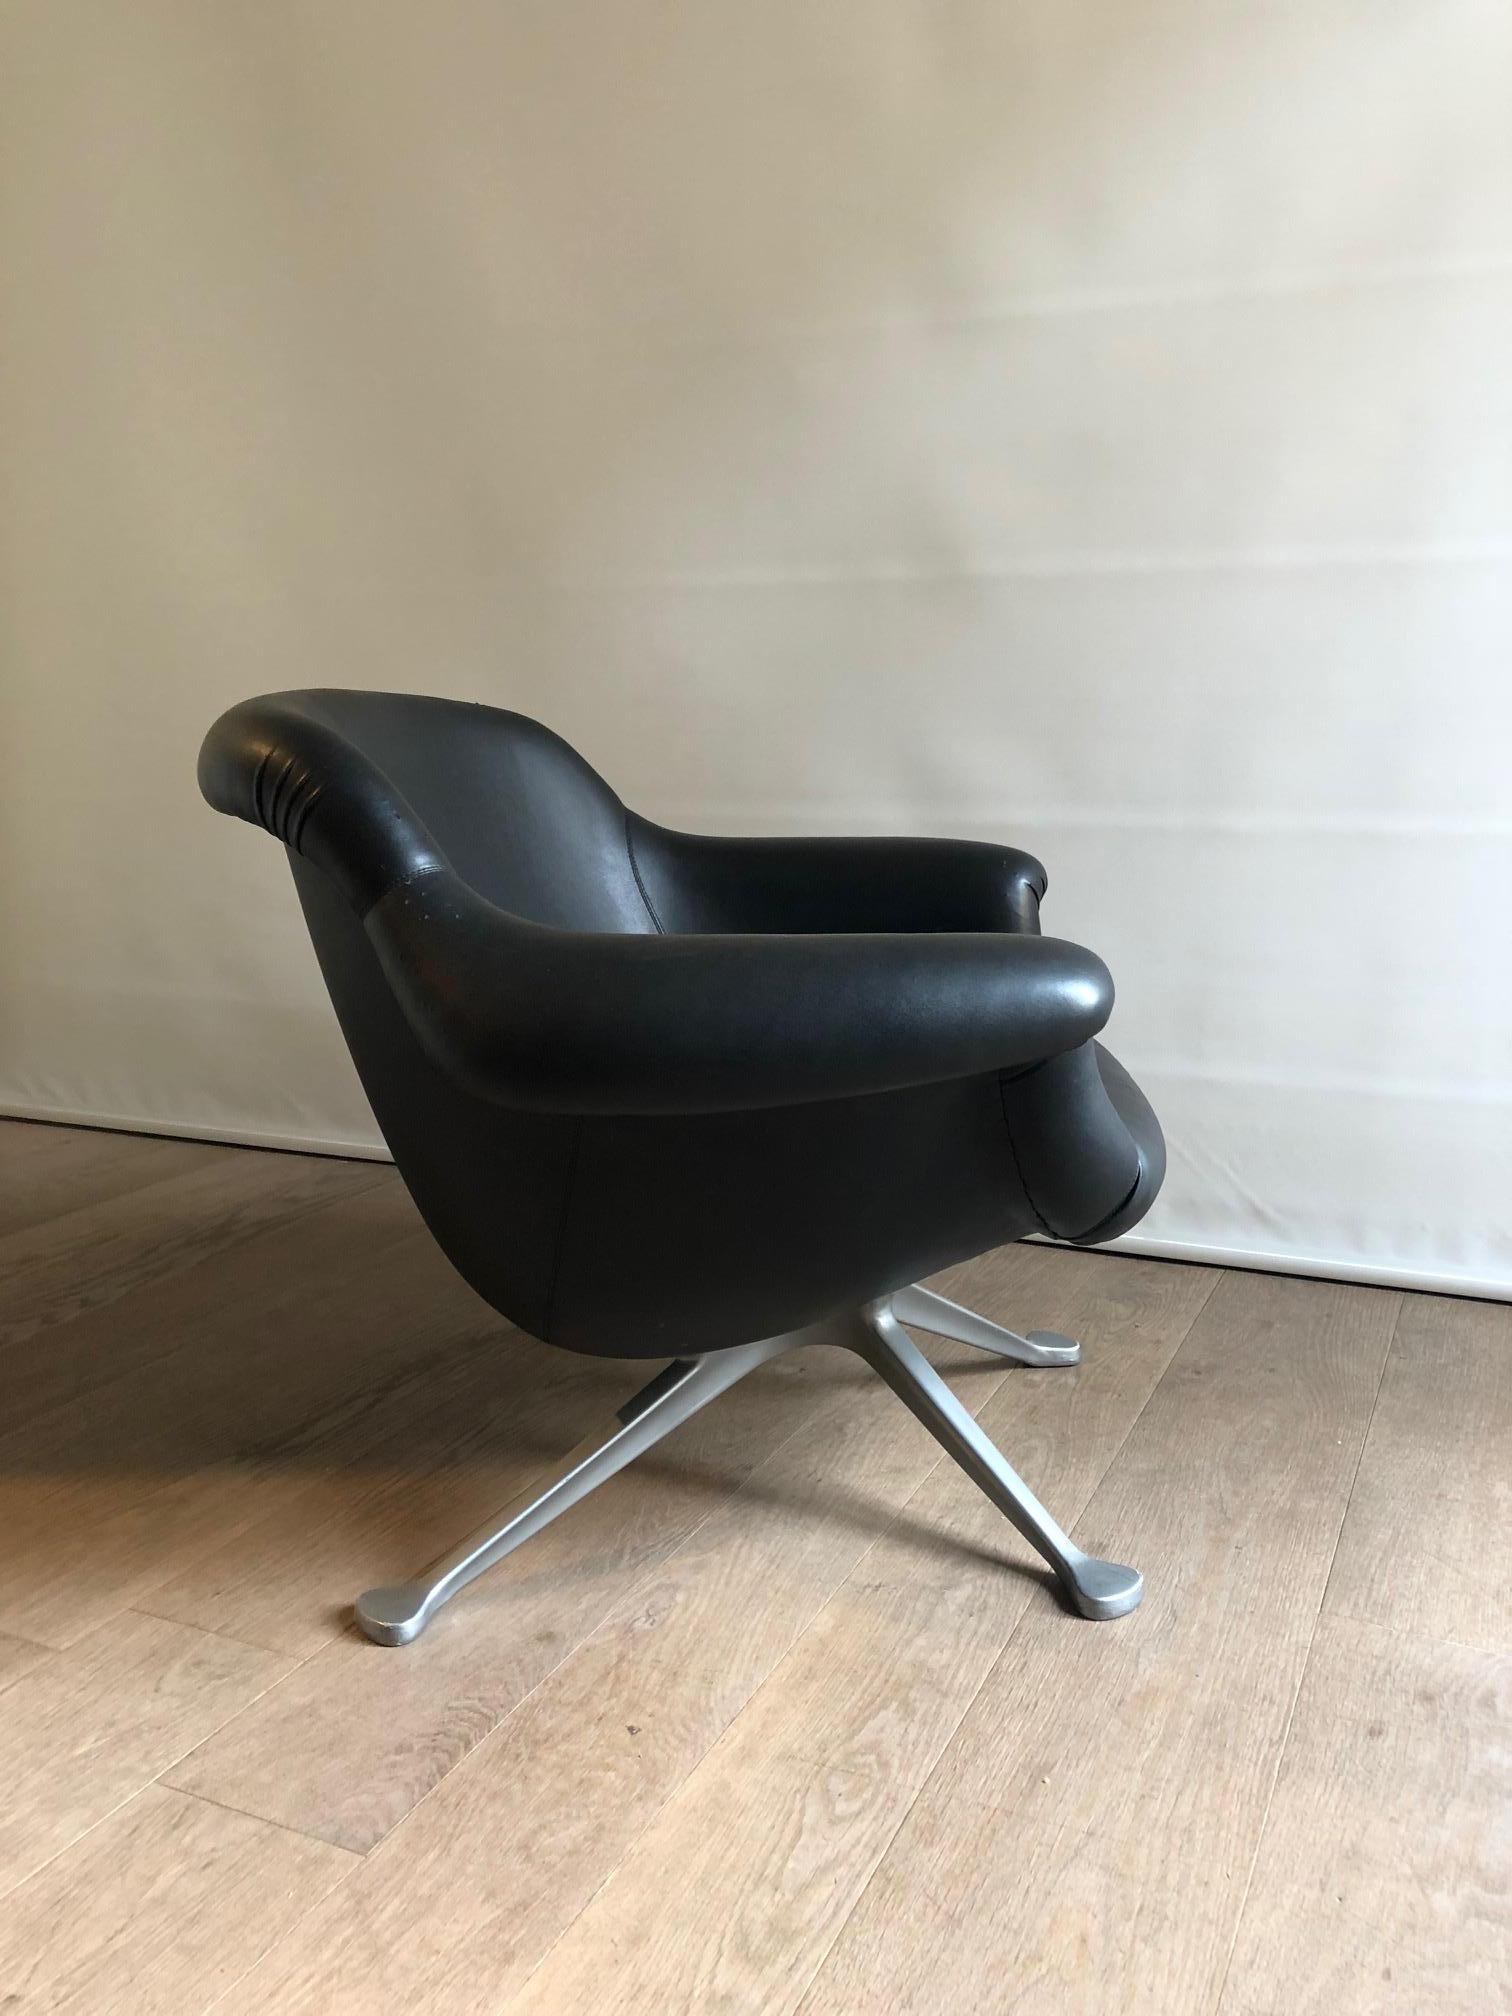 Rare lounge chair model 1110 designed by Angelo Mangiarotti for Cassina, Italy in the 1963.

Cast-aluminum base and mold-injected foam seat with the original black fake leather upholstery.

Literature: 1) Domus Magazine, June 1963; 2) Repertorio